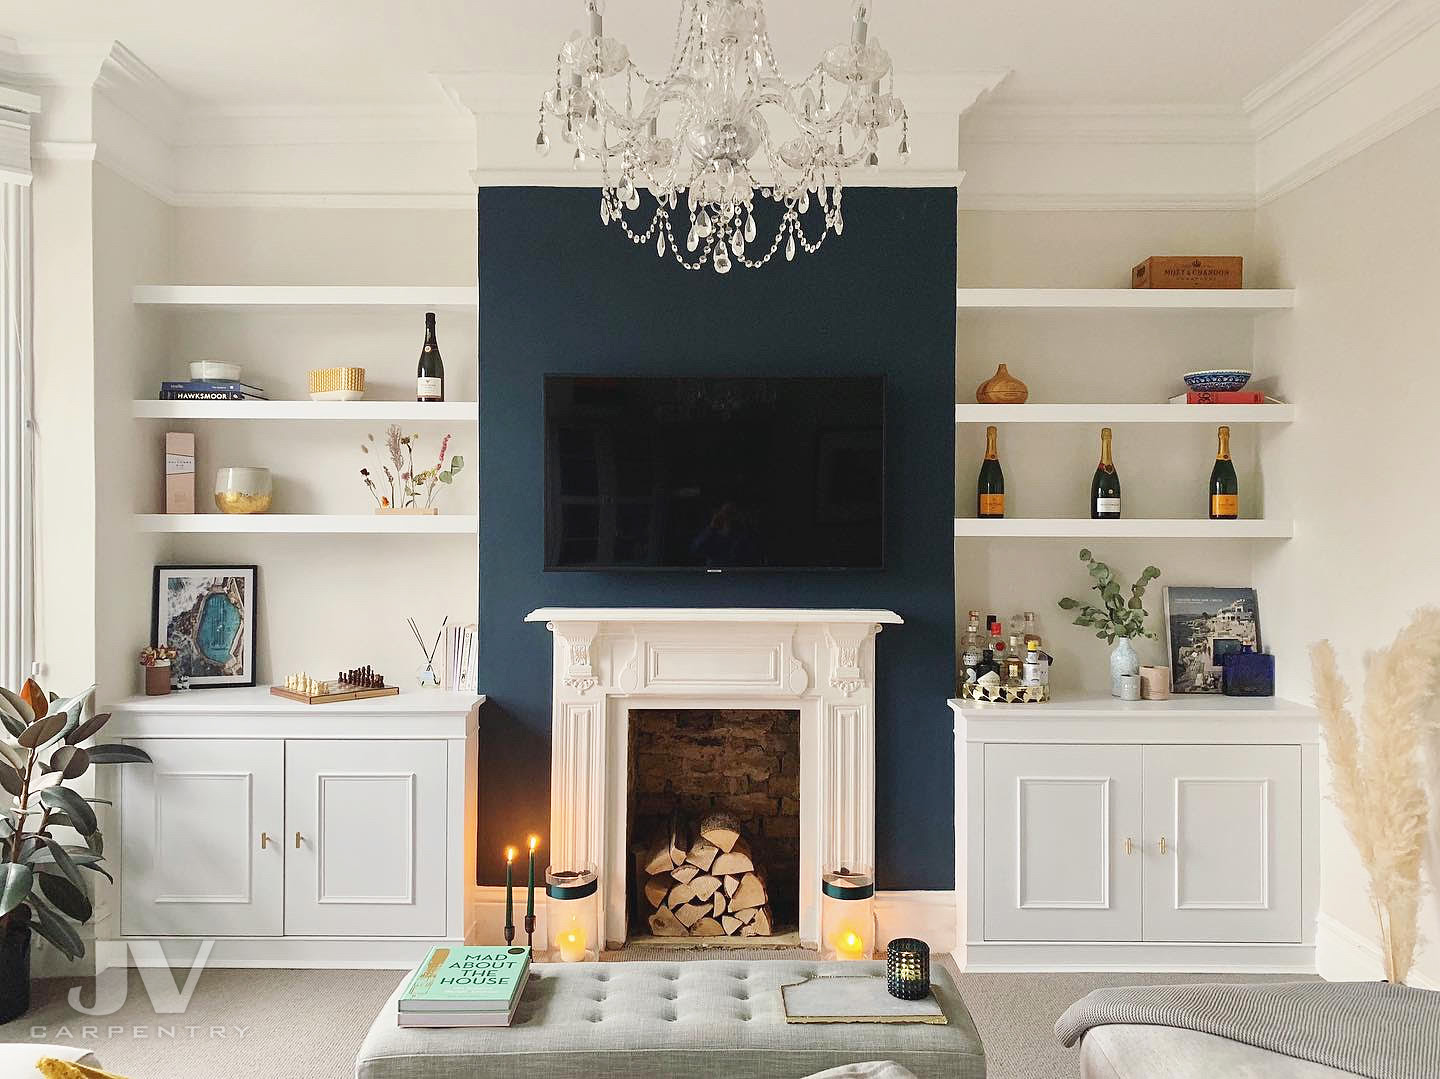 23 Alcove Shelving Ideas For Your, Floating Shelves Next To Fireplace Images